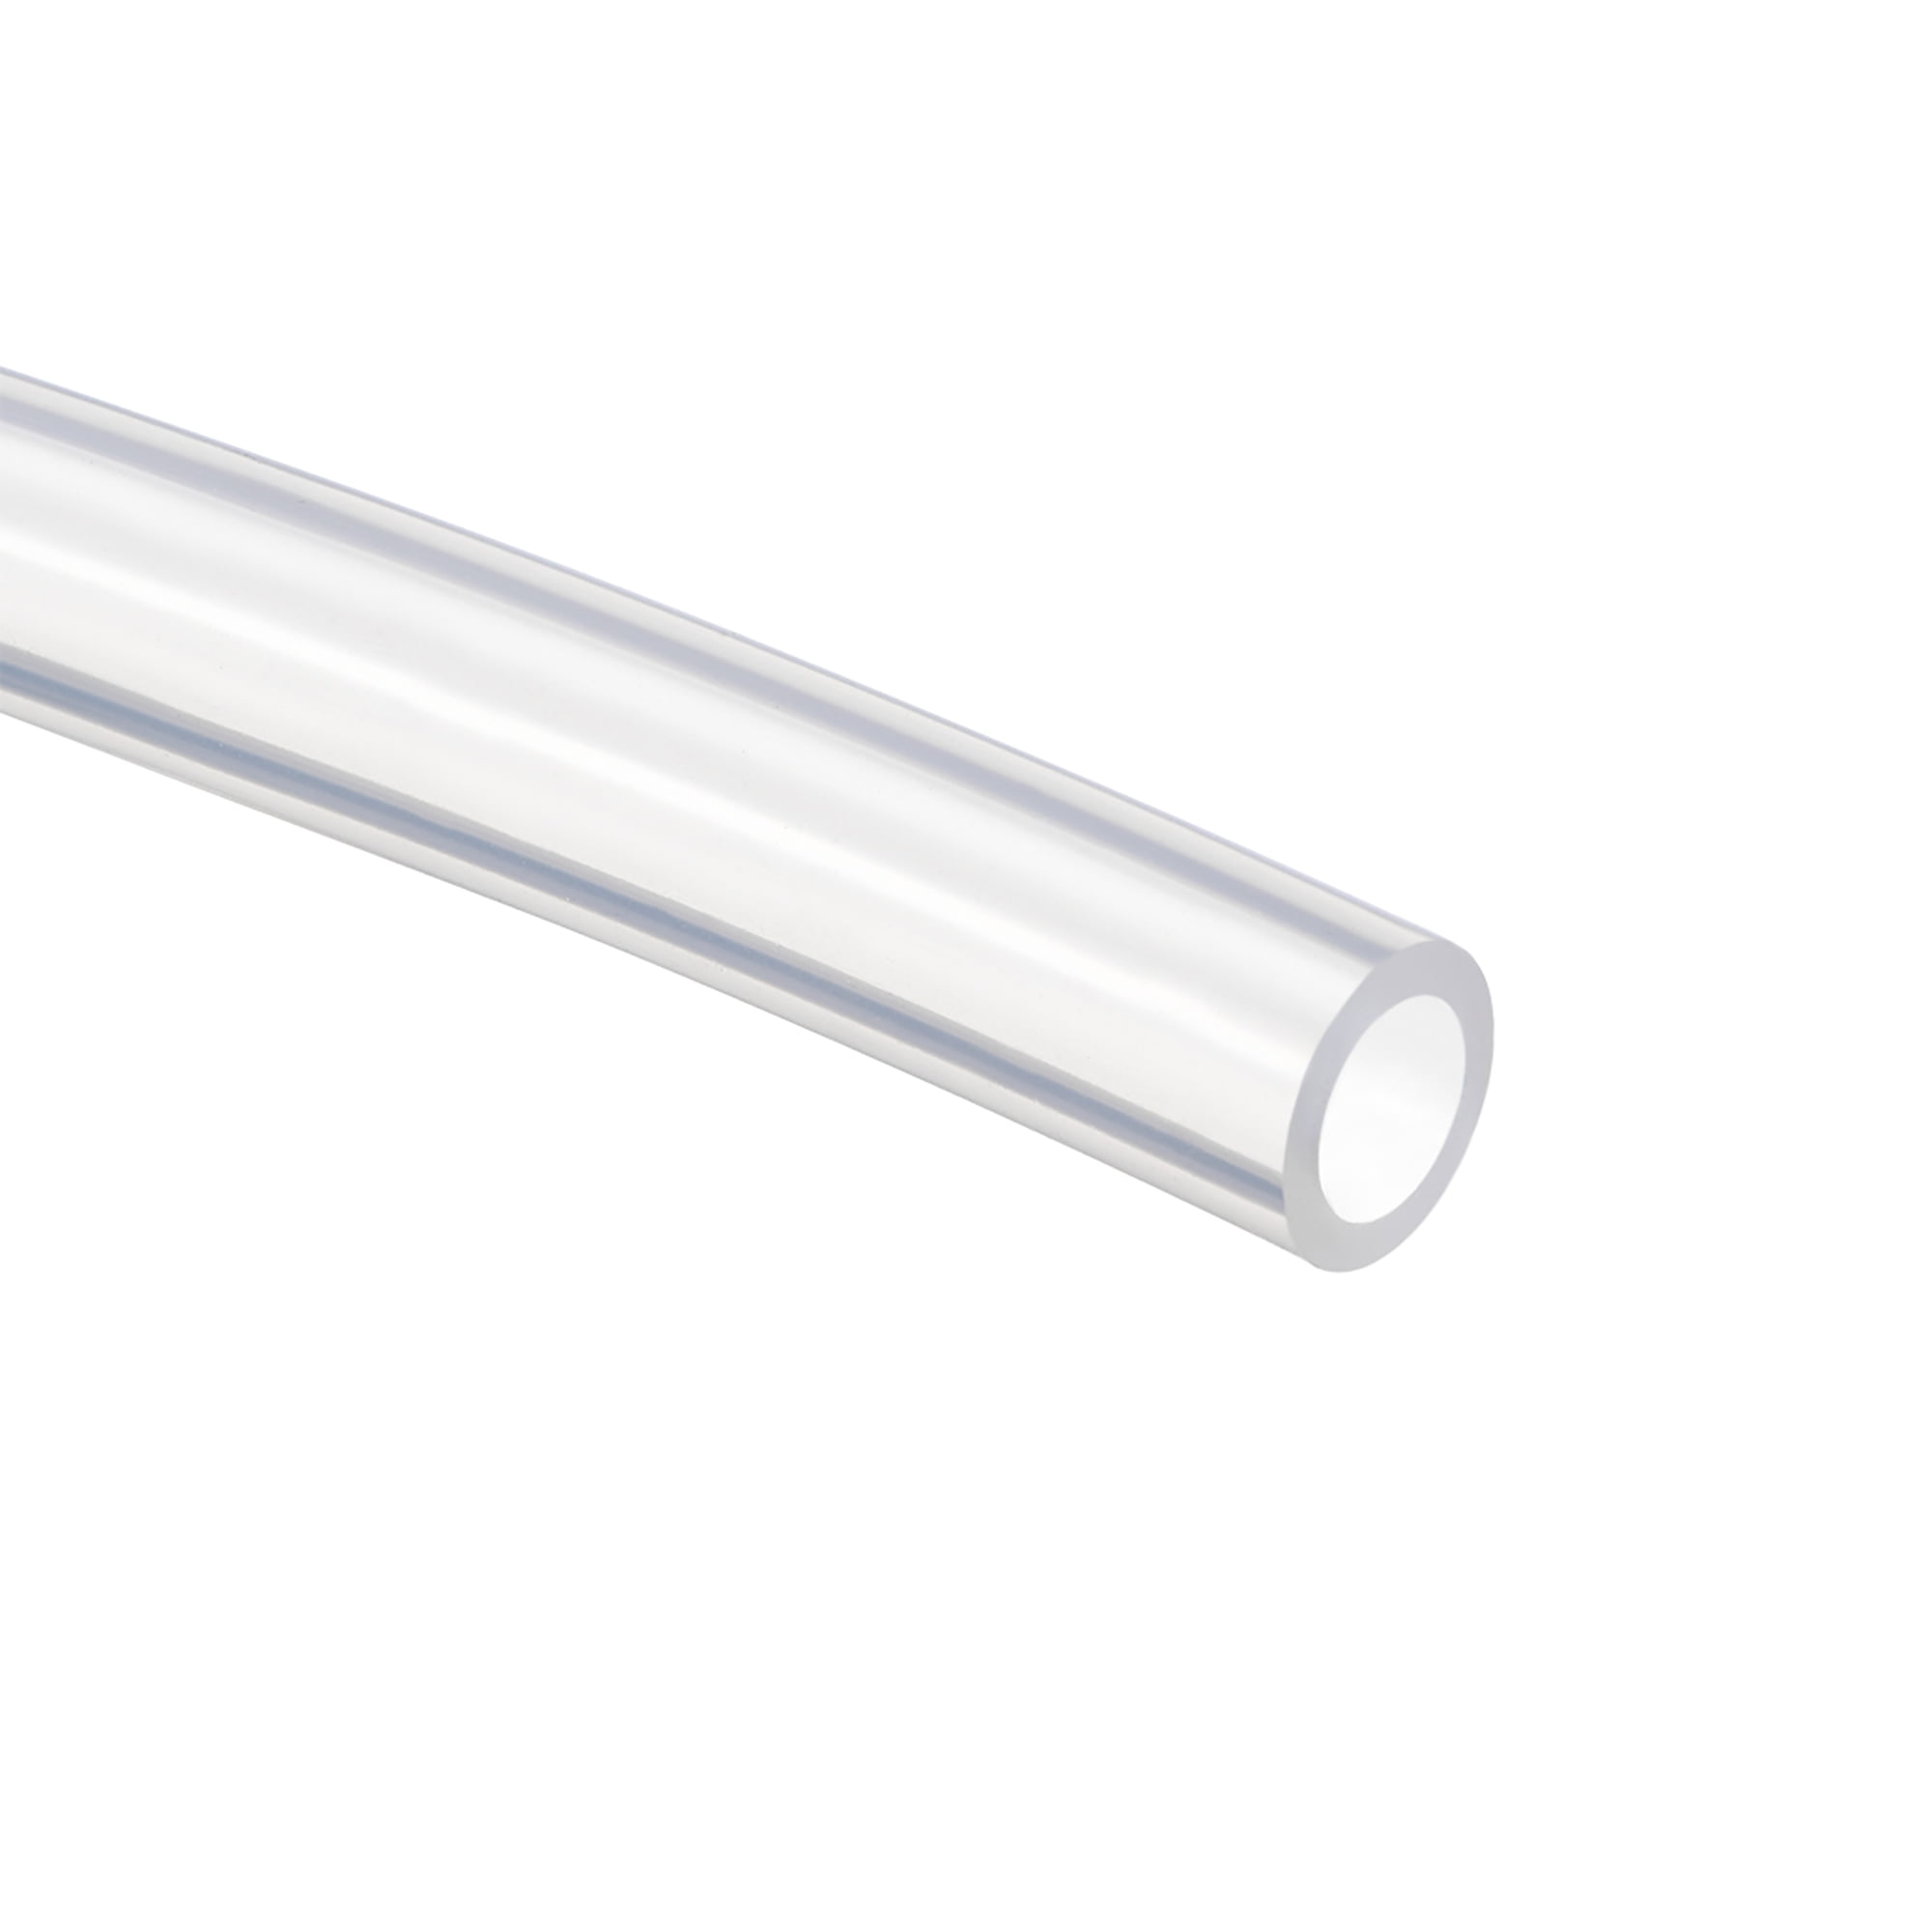 3/32 inch ID x 5/32 inch OD 13ft Rubber Tube Clear Details about   Silicone Tubing